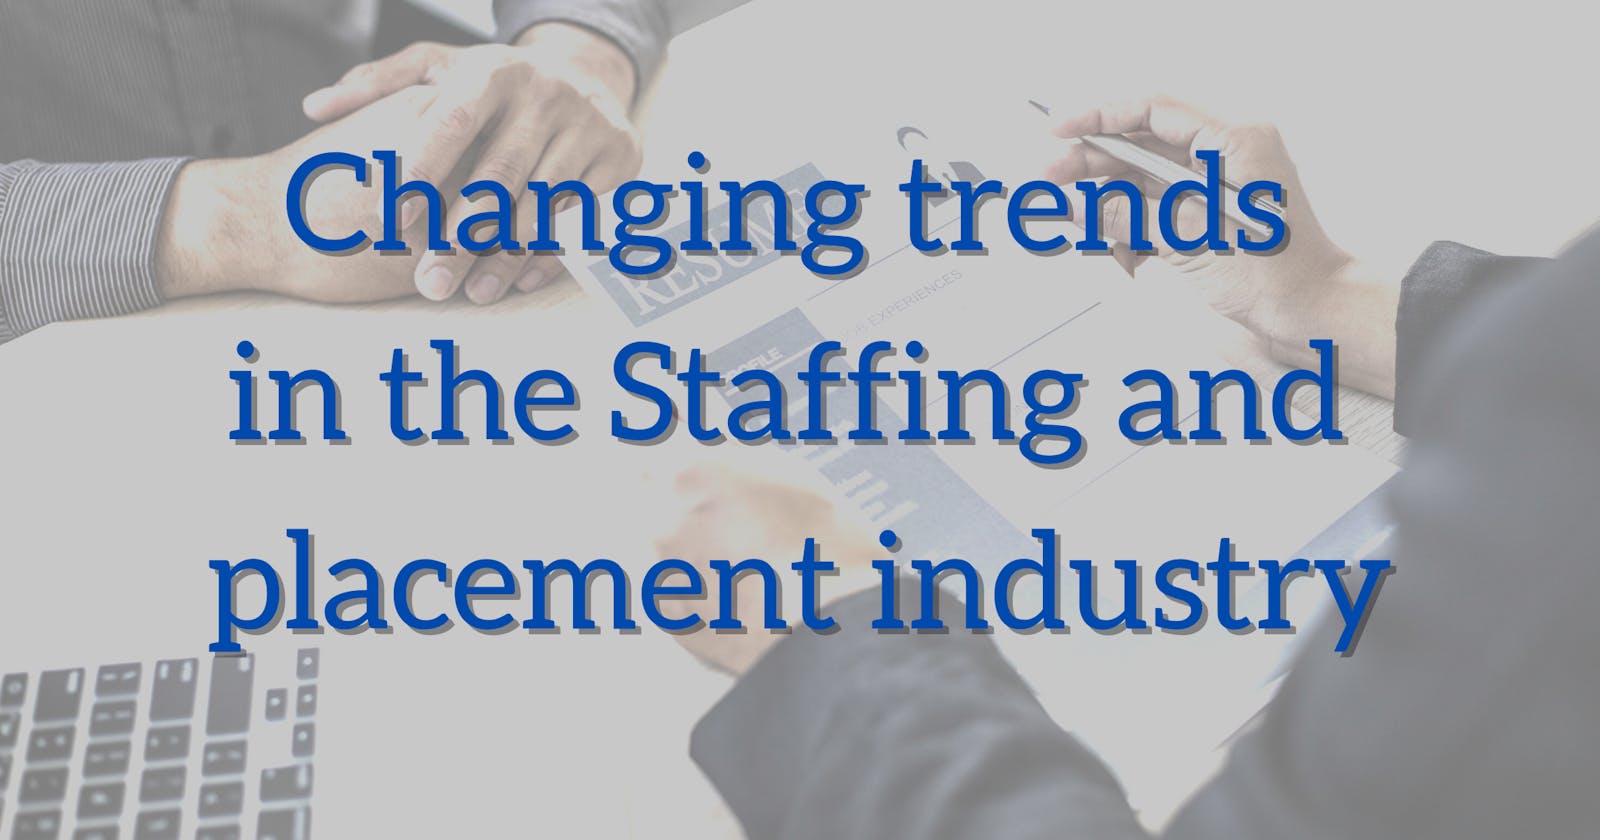 Changing trends in the Staffing and placement industry